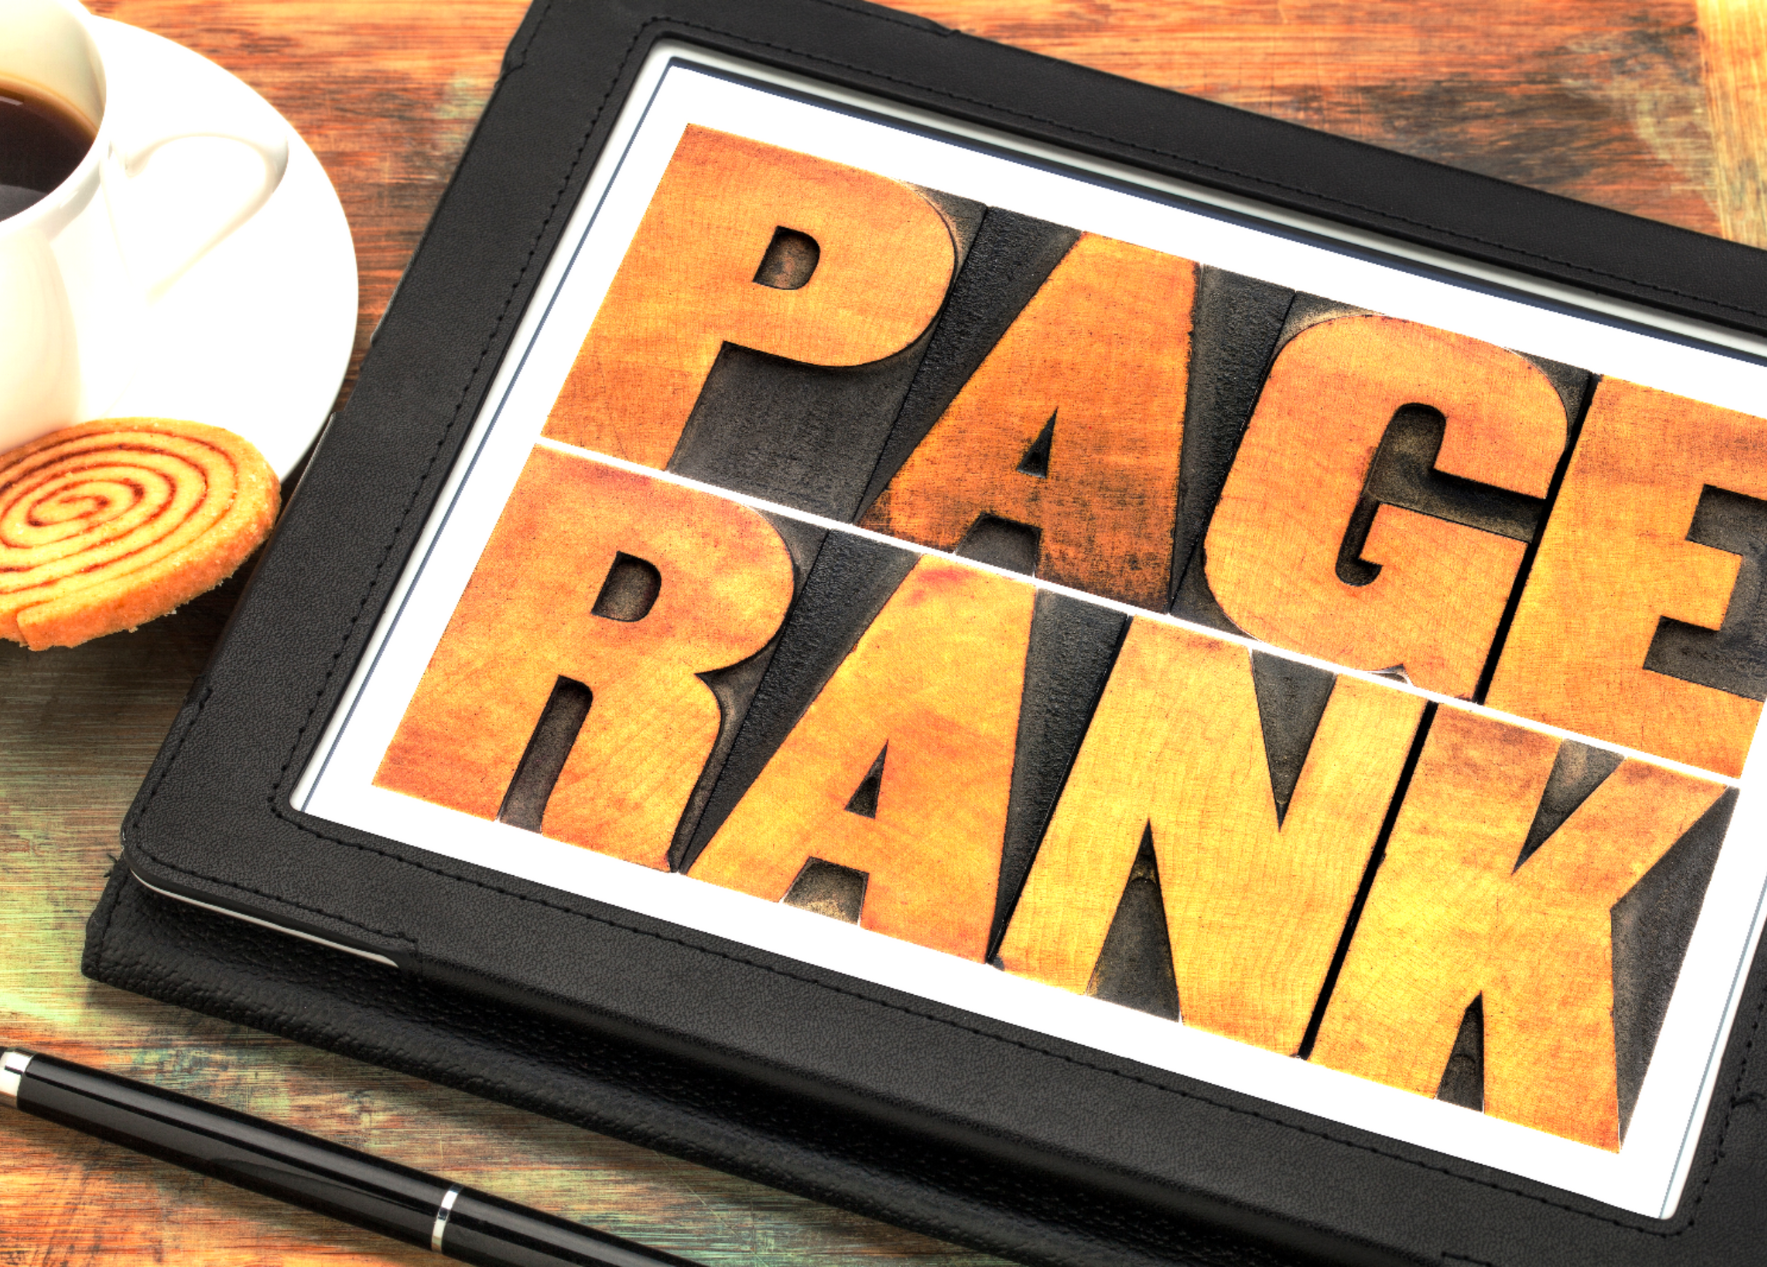 How to Rank your Page through SEO